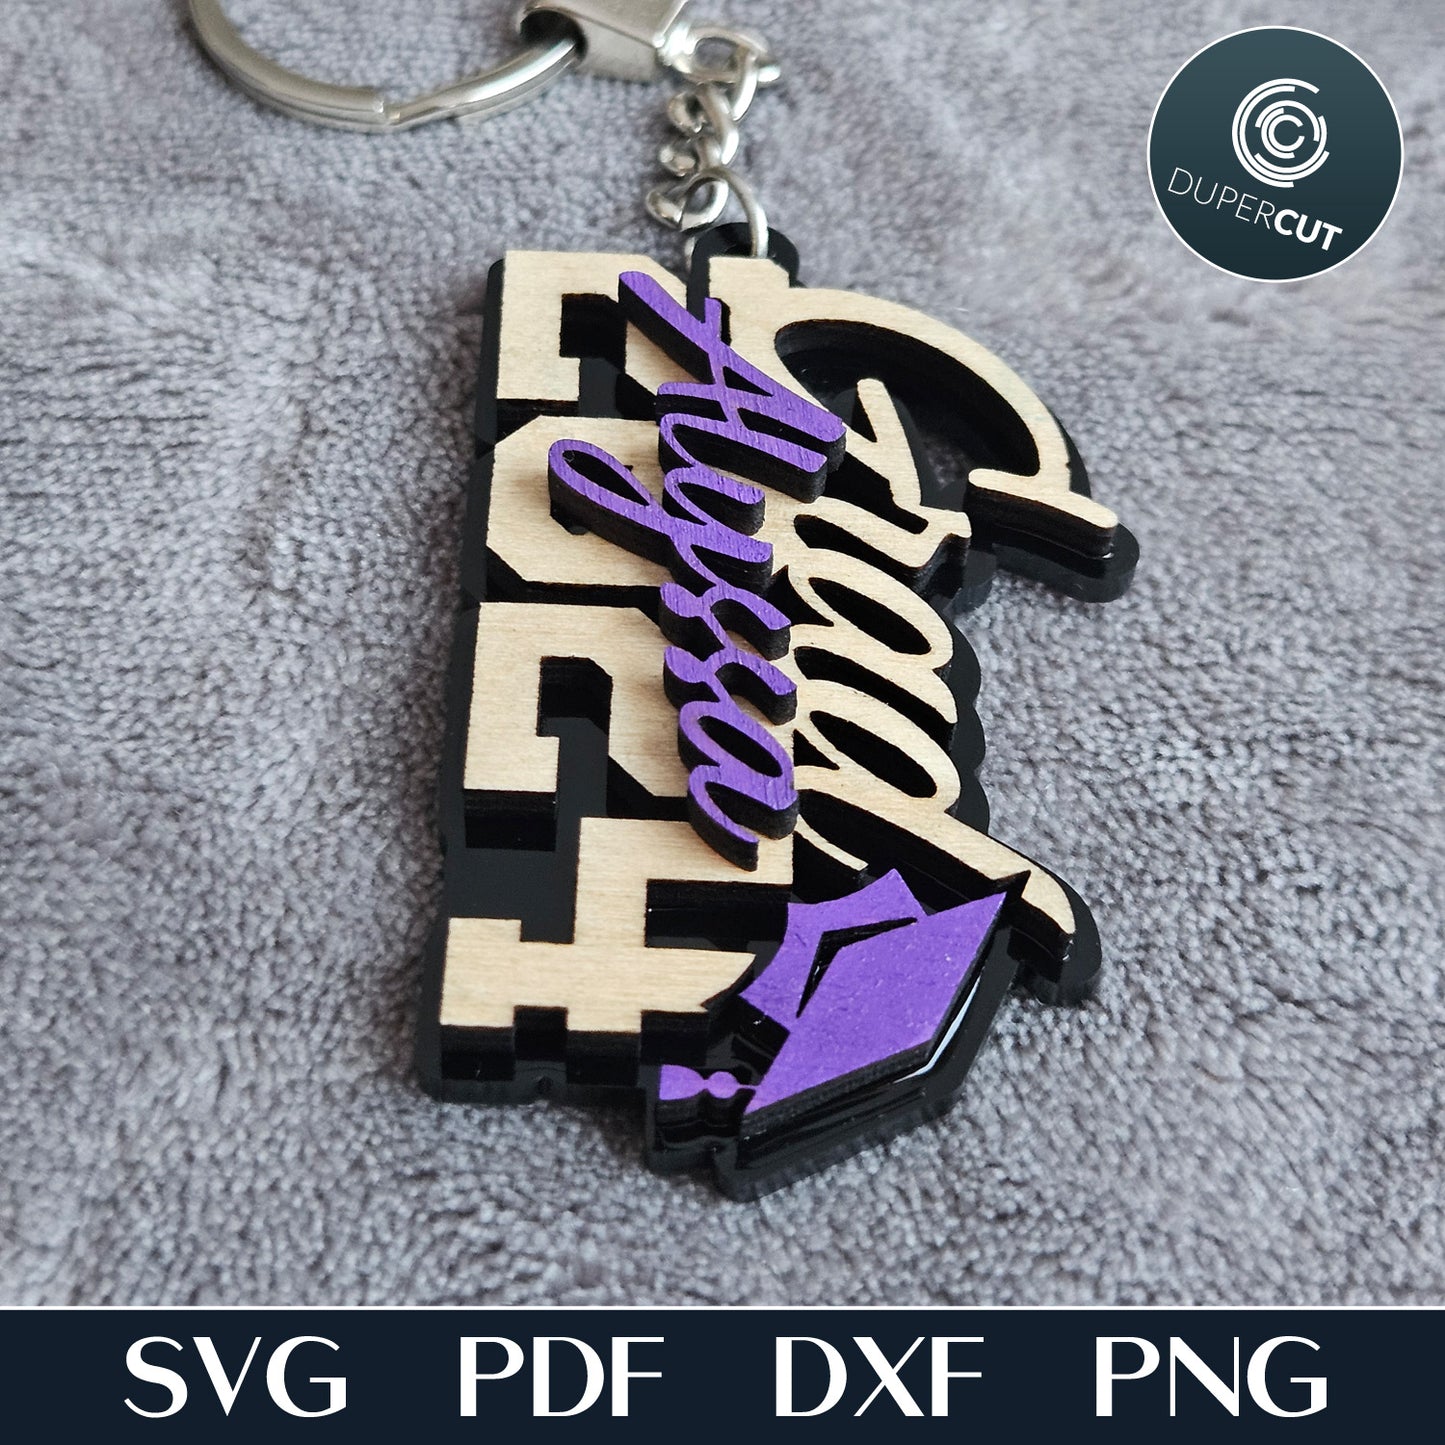 Congrats grad 2024 layered keychain, bag charm, personalized grad gift - SVG DXF vector files for laser cutting, cricut, xtool, CNC plasma machines by www.dupercut.com